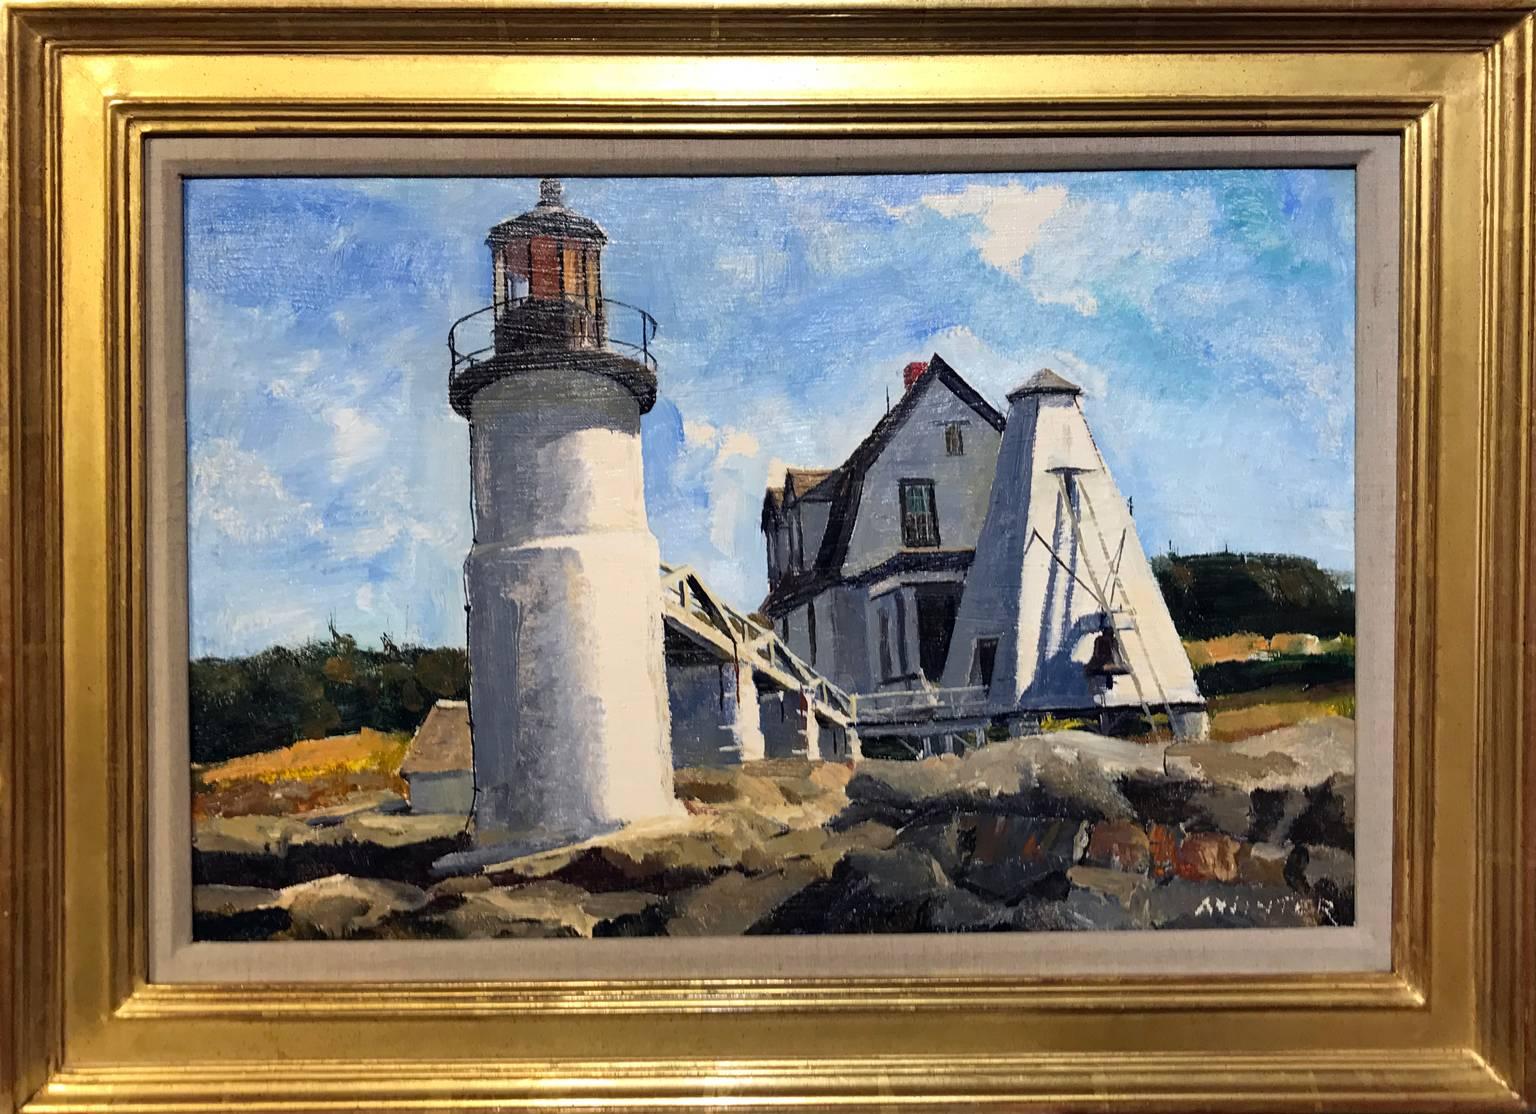 Marshall Point Lighthouse, Port Clyde, Maine, Oil on Artists' Board, American - Painting by Andrew Winter